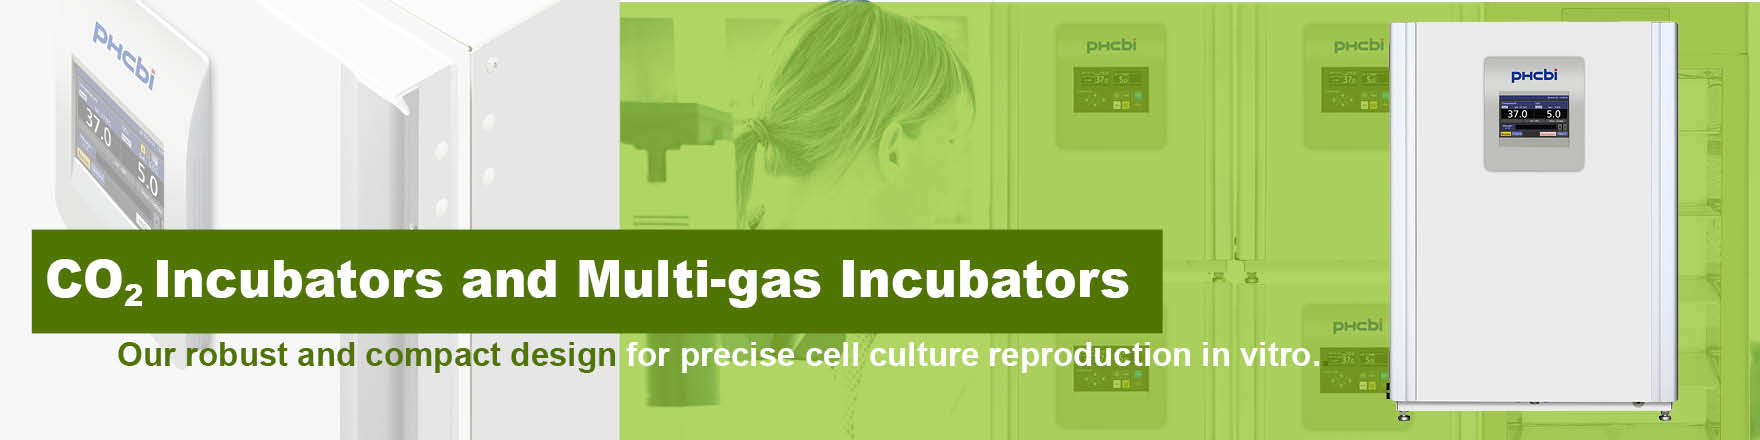 CO2 incubators for growing microbiological cell cultures